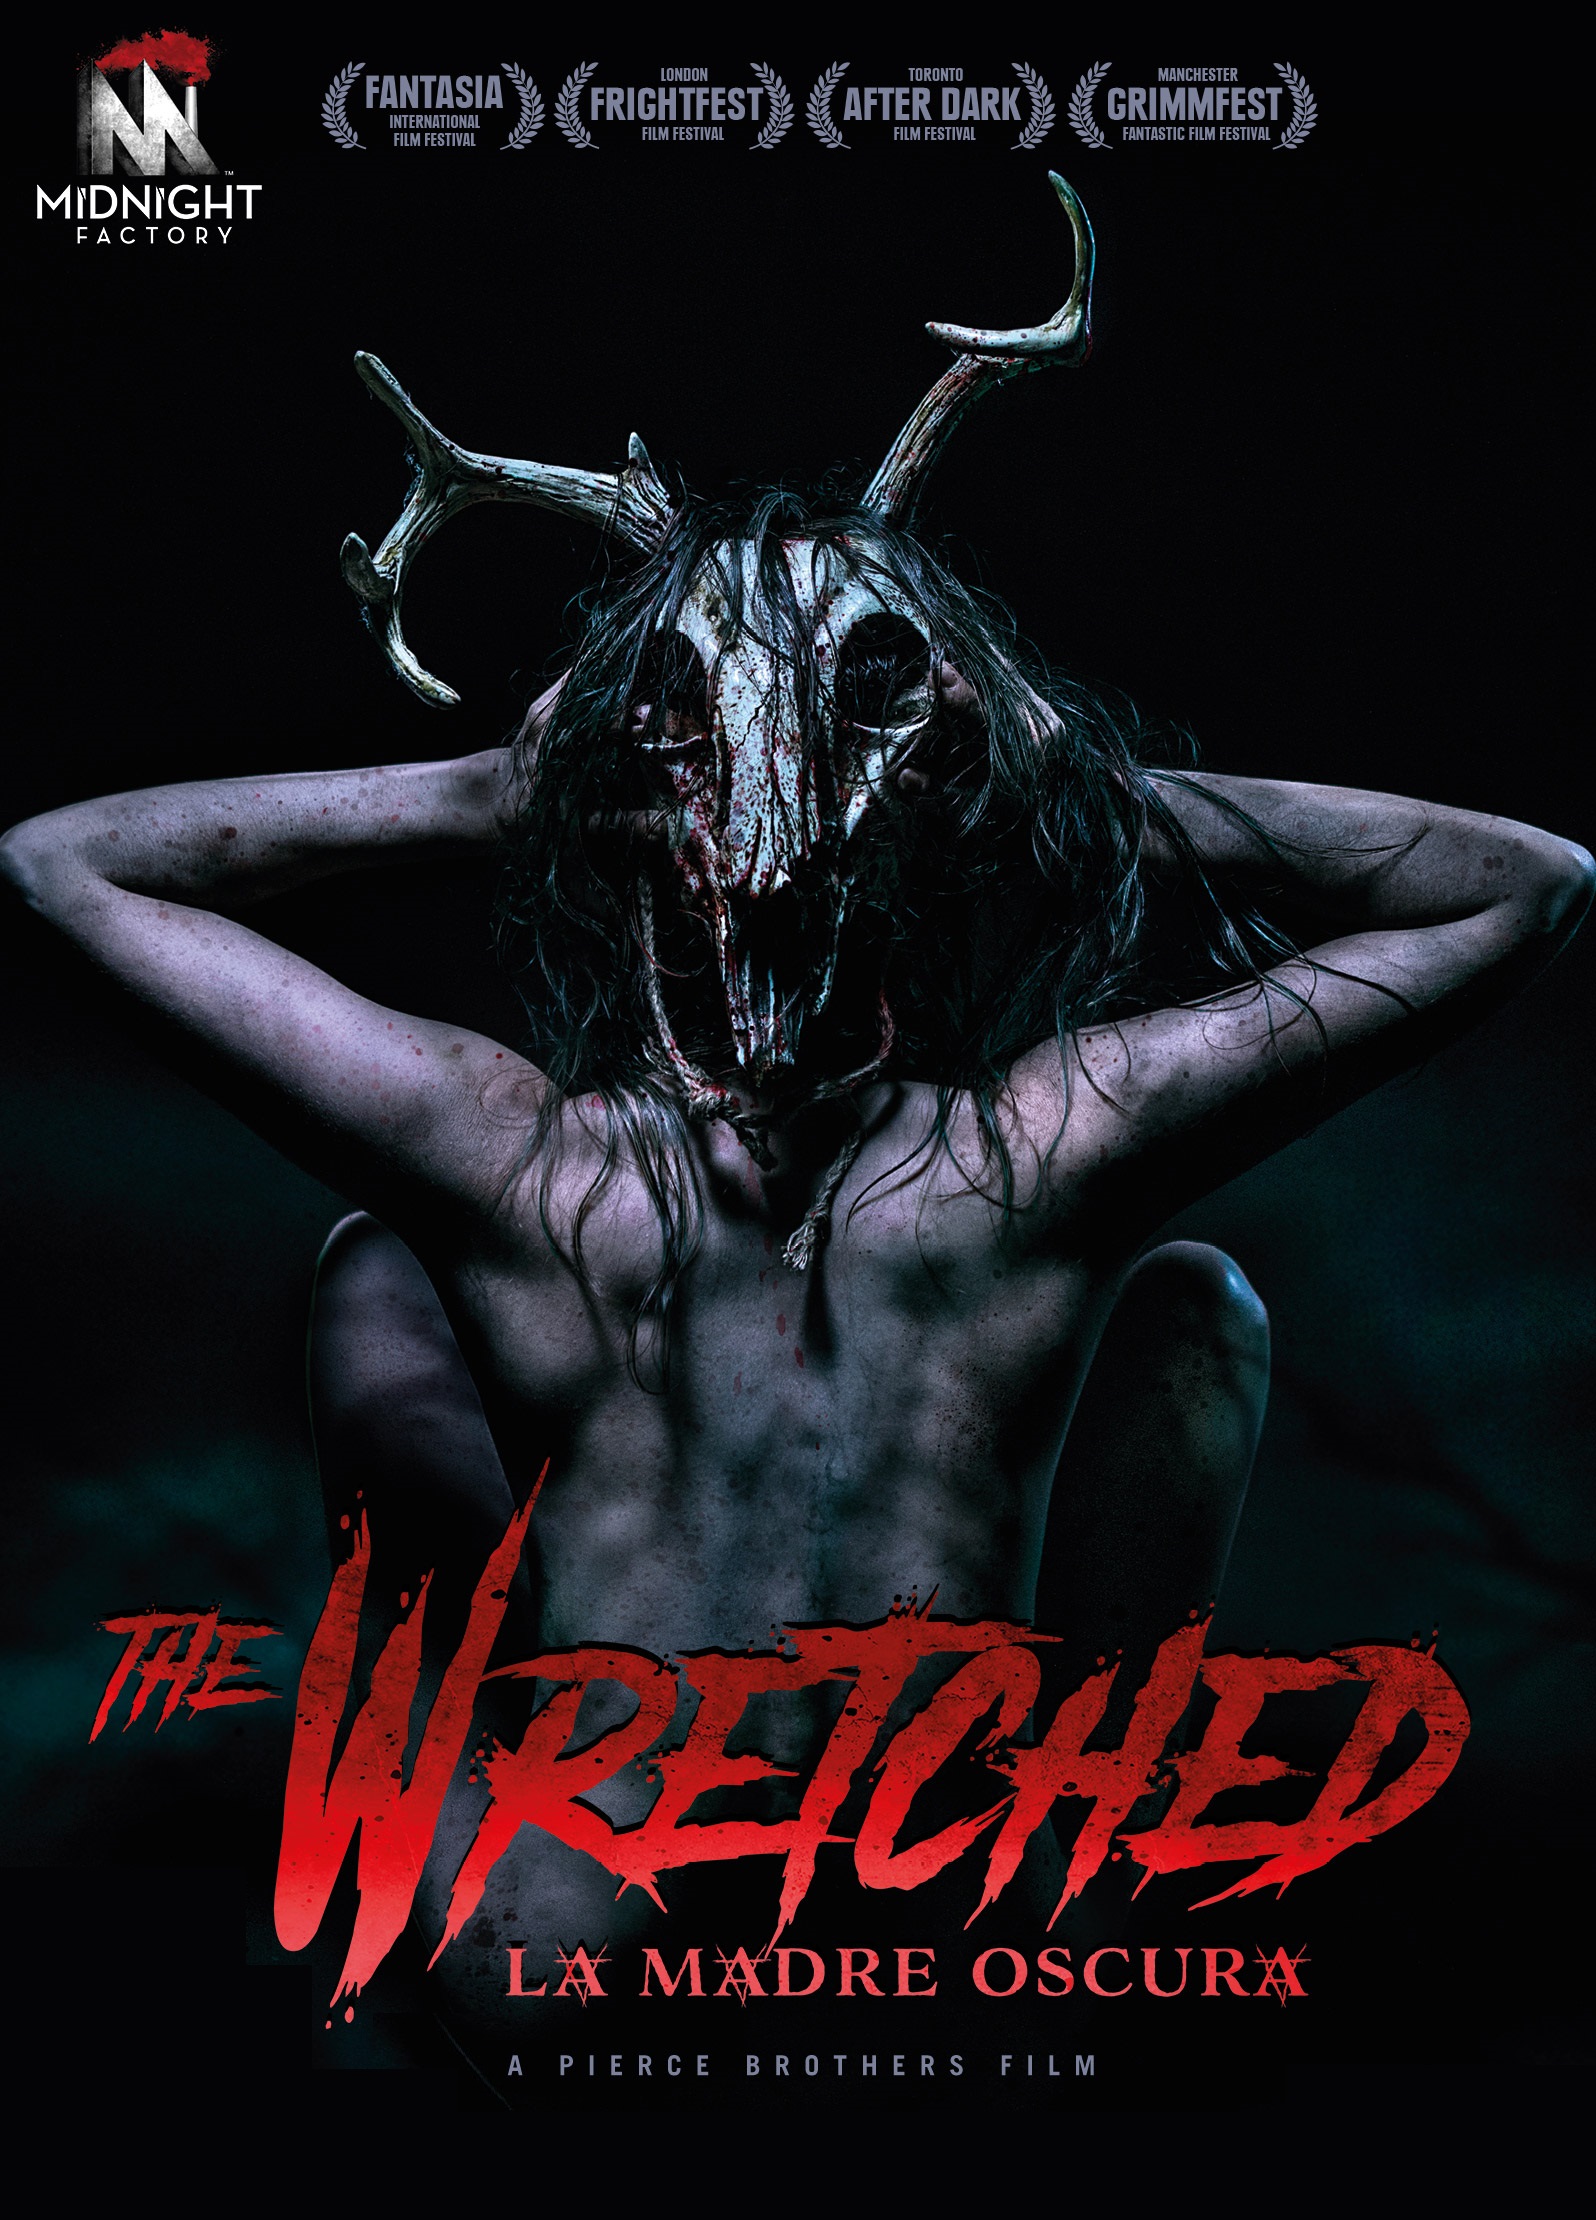 The Wretched – La madre oscura [HD] (2019)